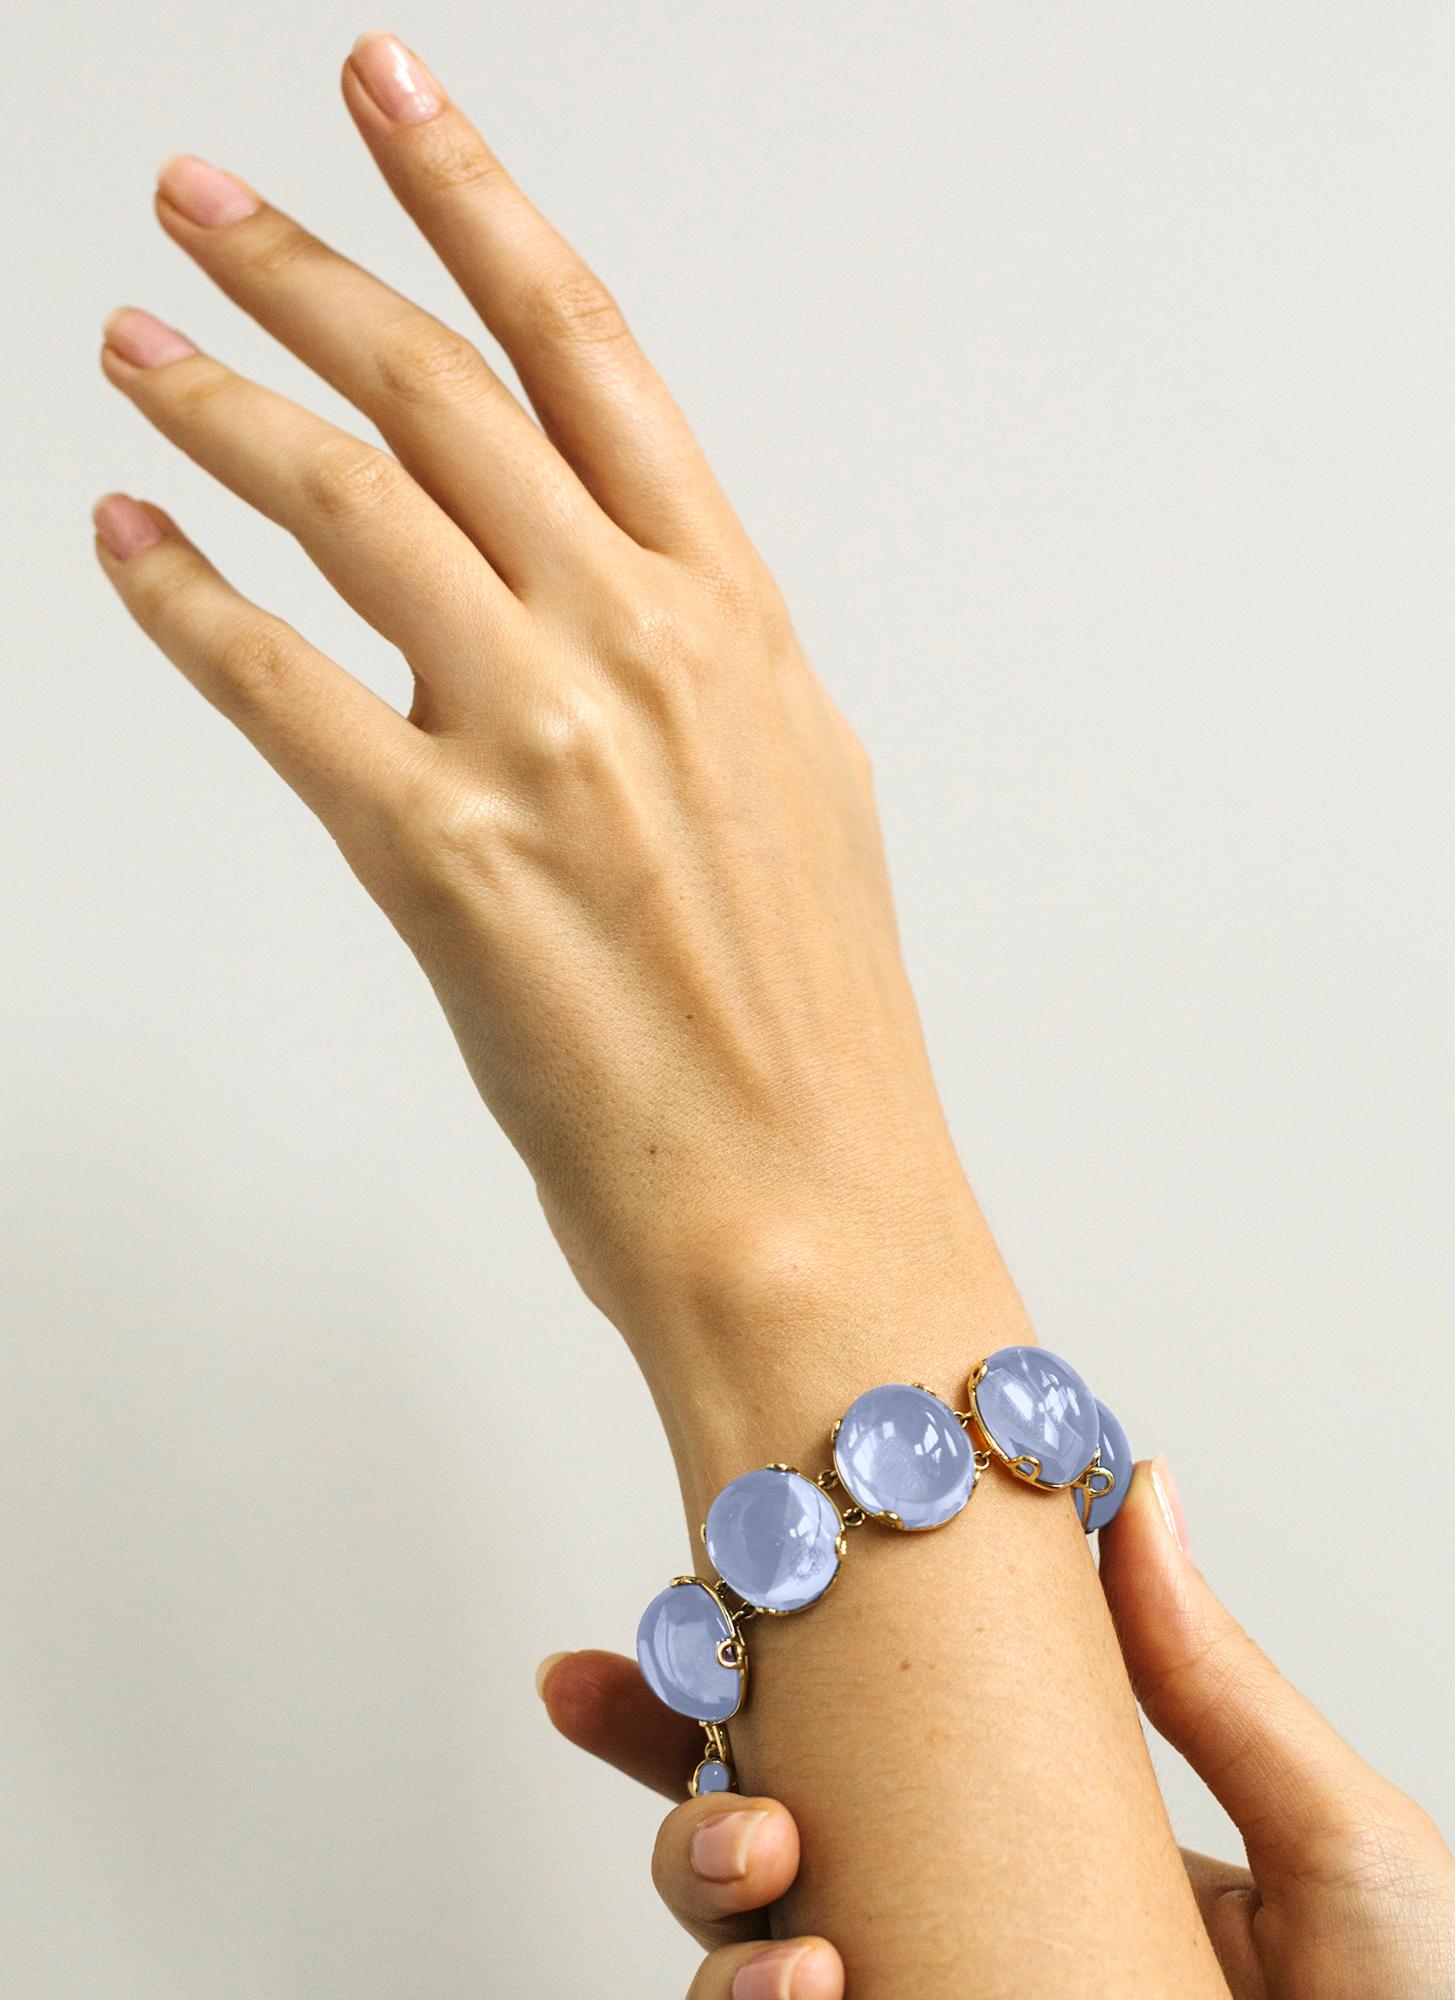 Blue Chalcedony Oval Cabochon Bracelet in 18K Yellow Gold, from 'Rock 'N Roll' Collection.
Please allow 5-6 weeks for this item to be delivered. 
 
Stone Size: 20 x 17 mm